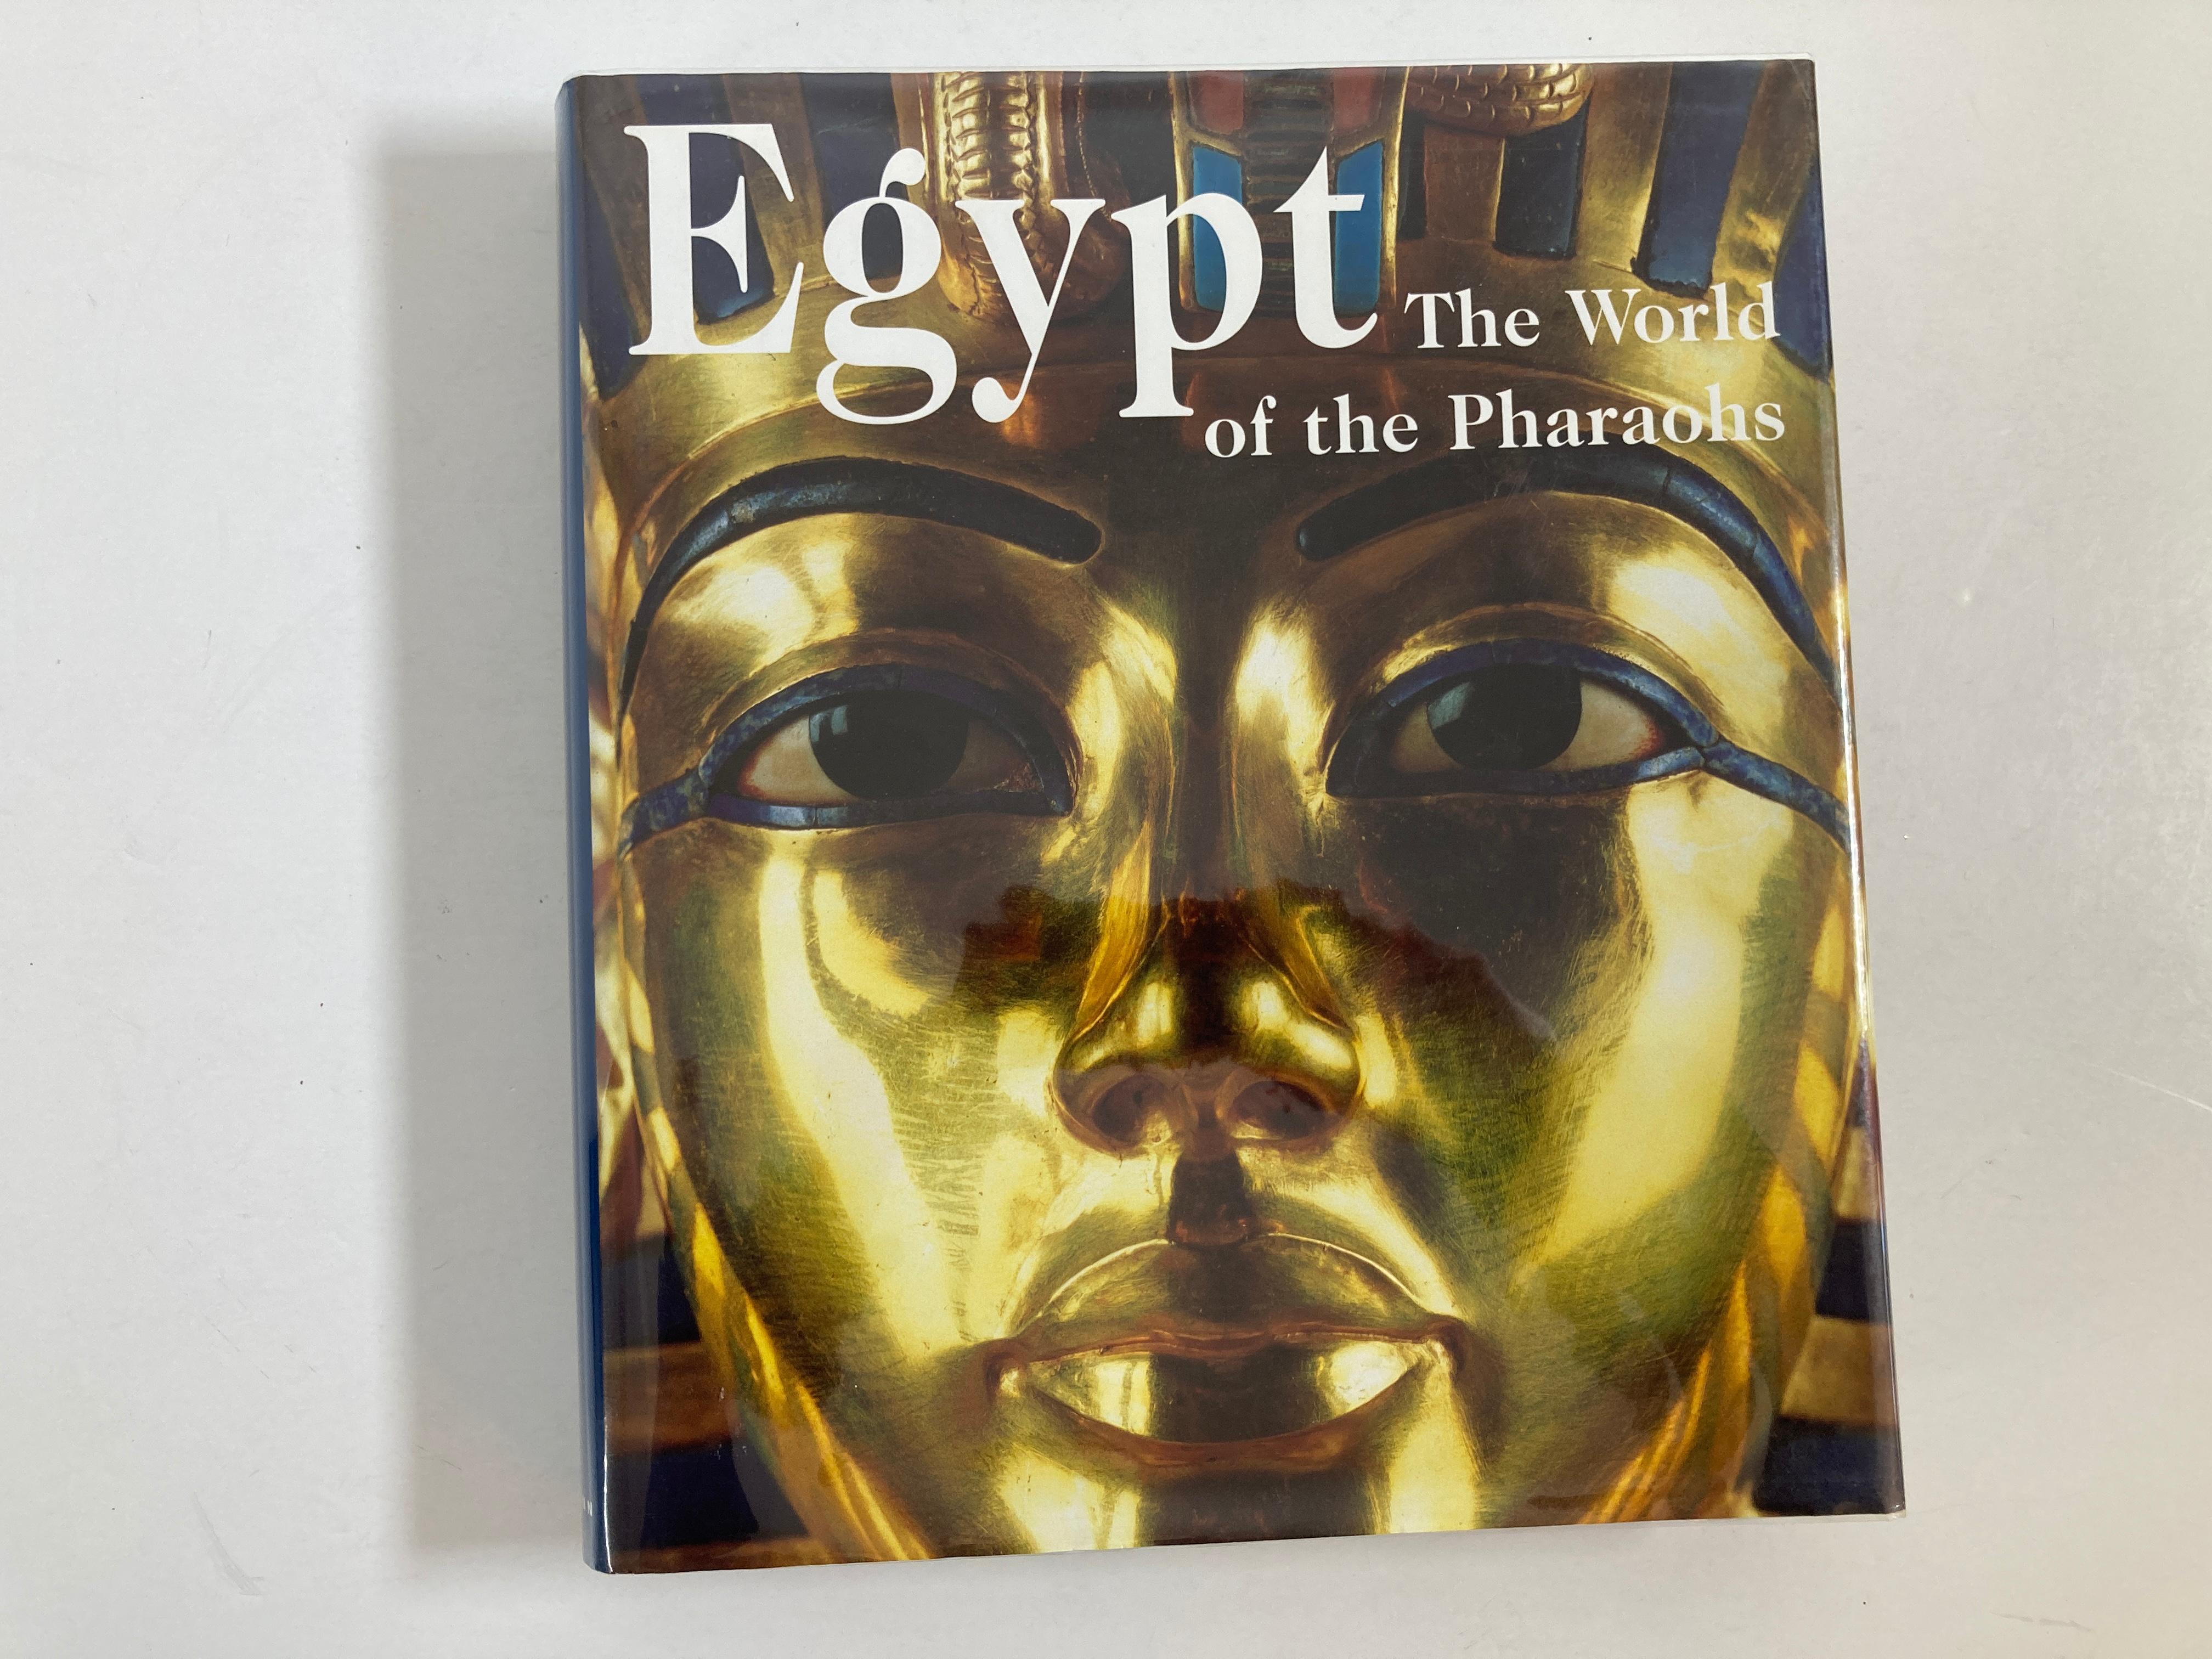 Egypt: The World of the Pharaohs
Regine Schulz, Matthias Seidel
Roman emperors, Arab scholars, and early travelers were already drawn to and enchanted by the fascination of the land along the Nile. The pyramids of Giza, the temple-city of Karnak,